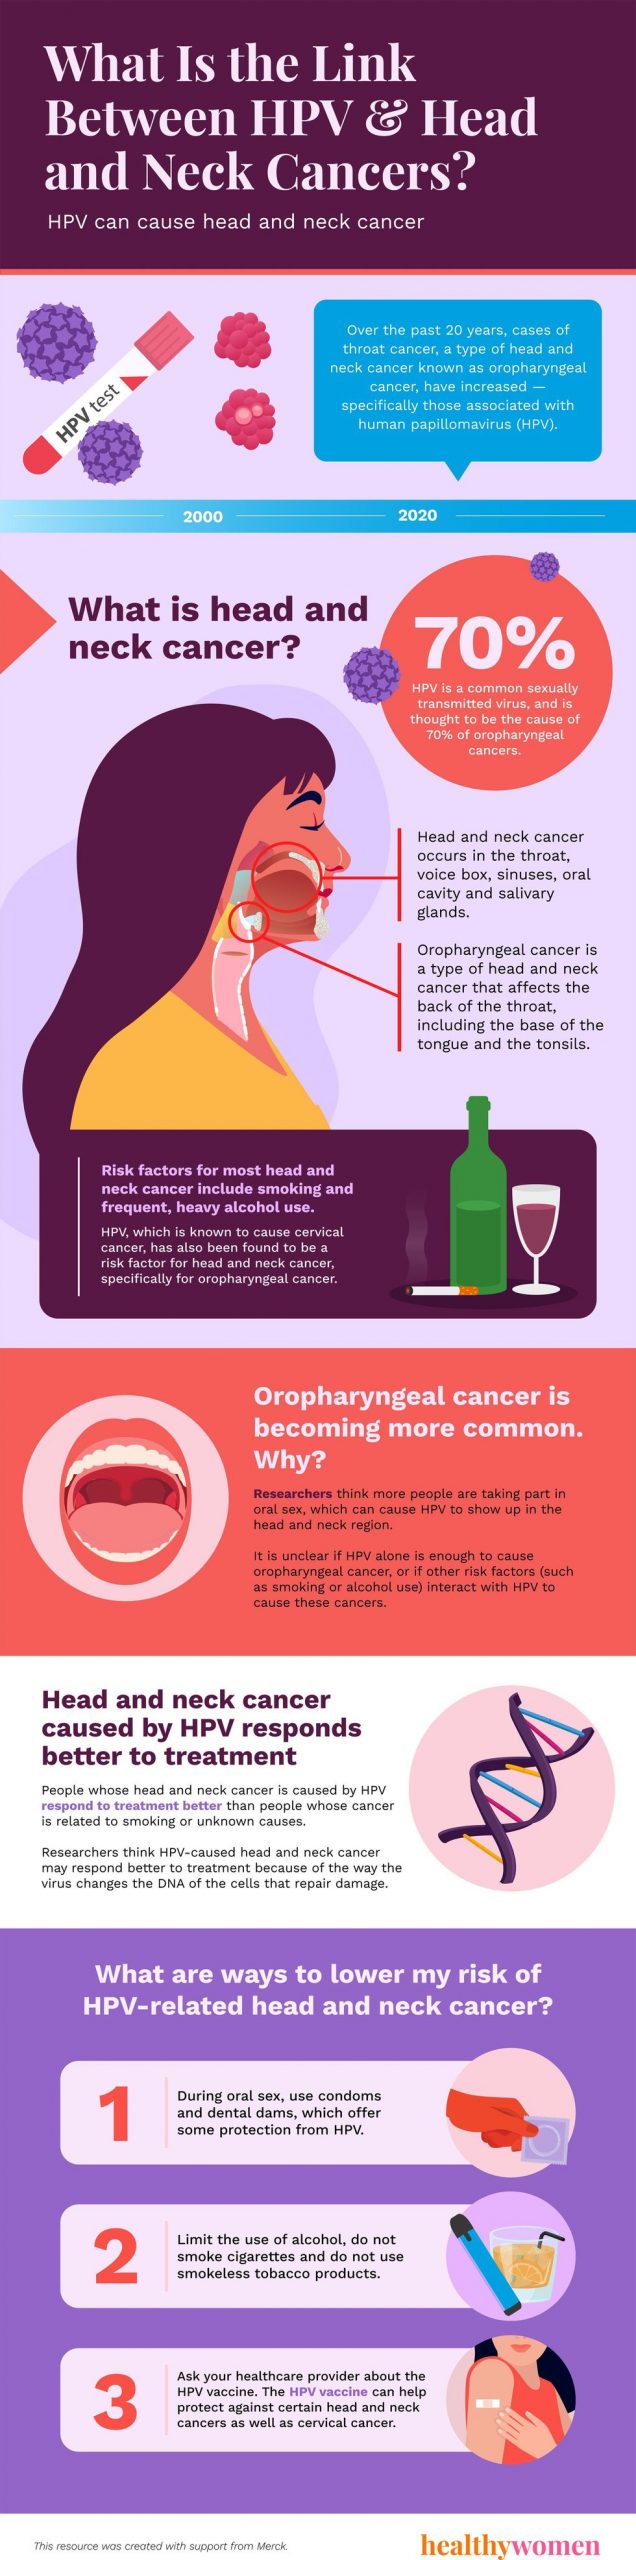 Infographic What Is the Link Between HPV & Head and Neck Cancers?. Click the image to open the PDF